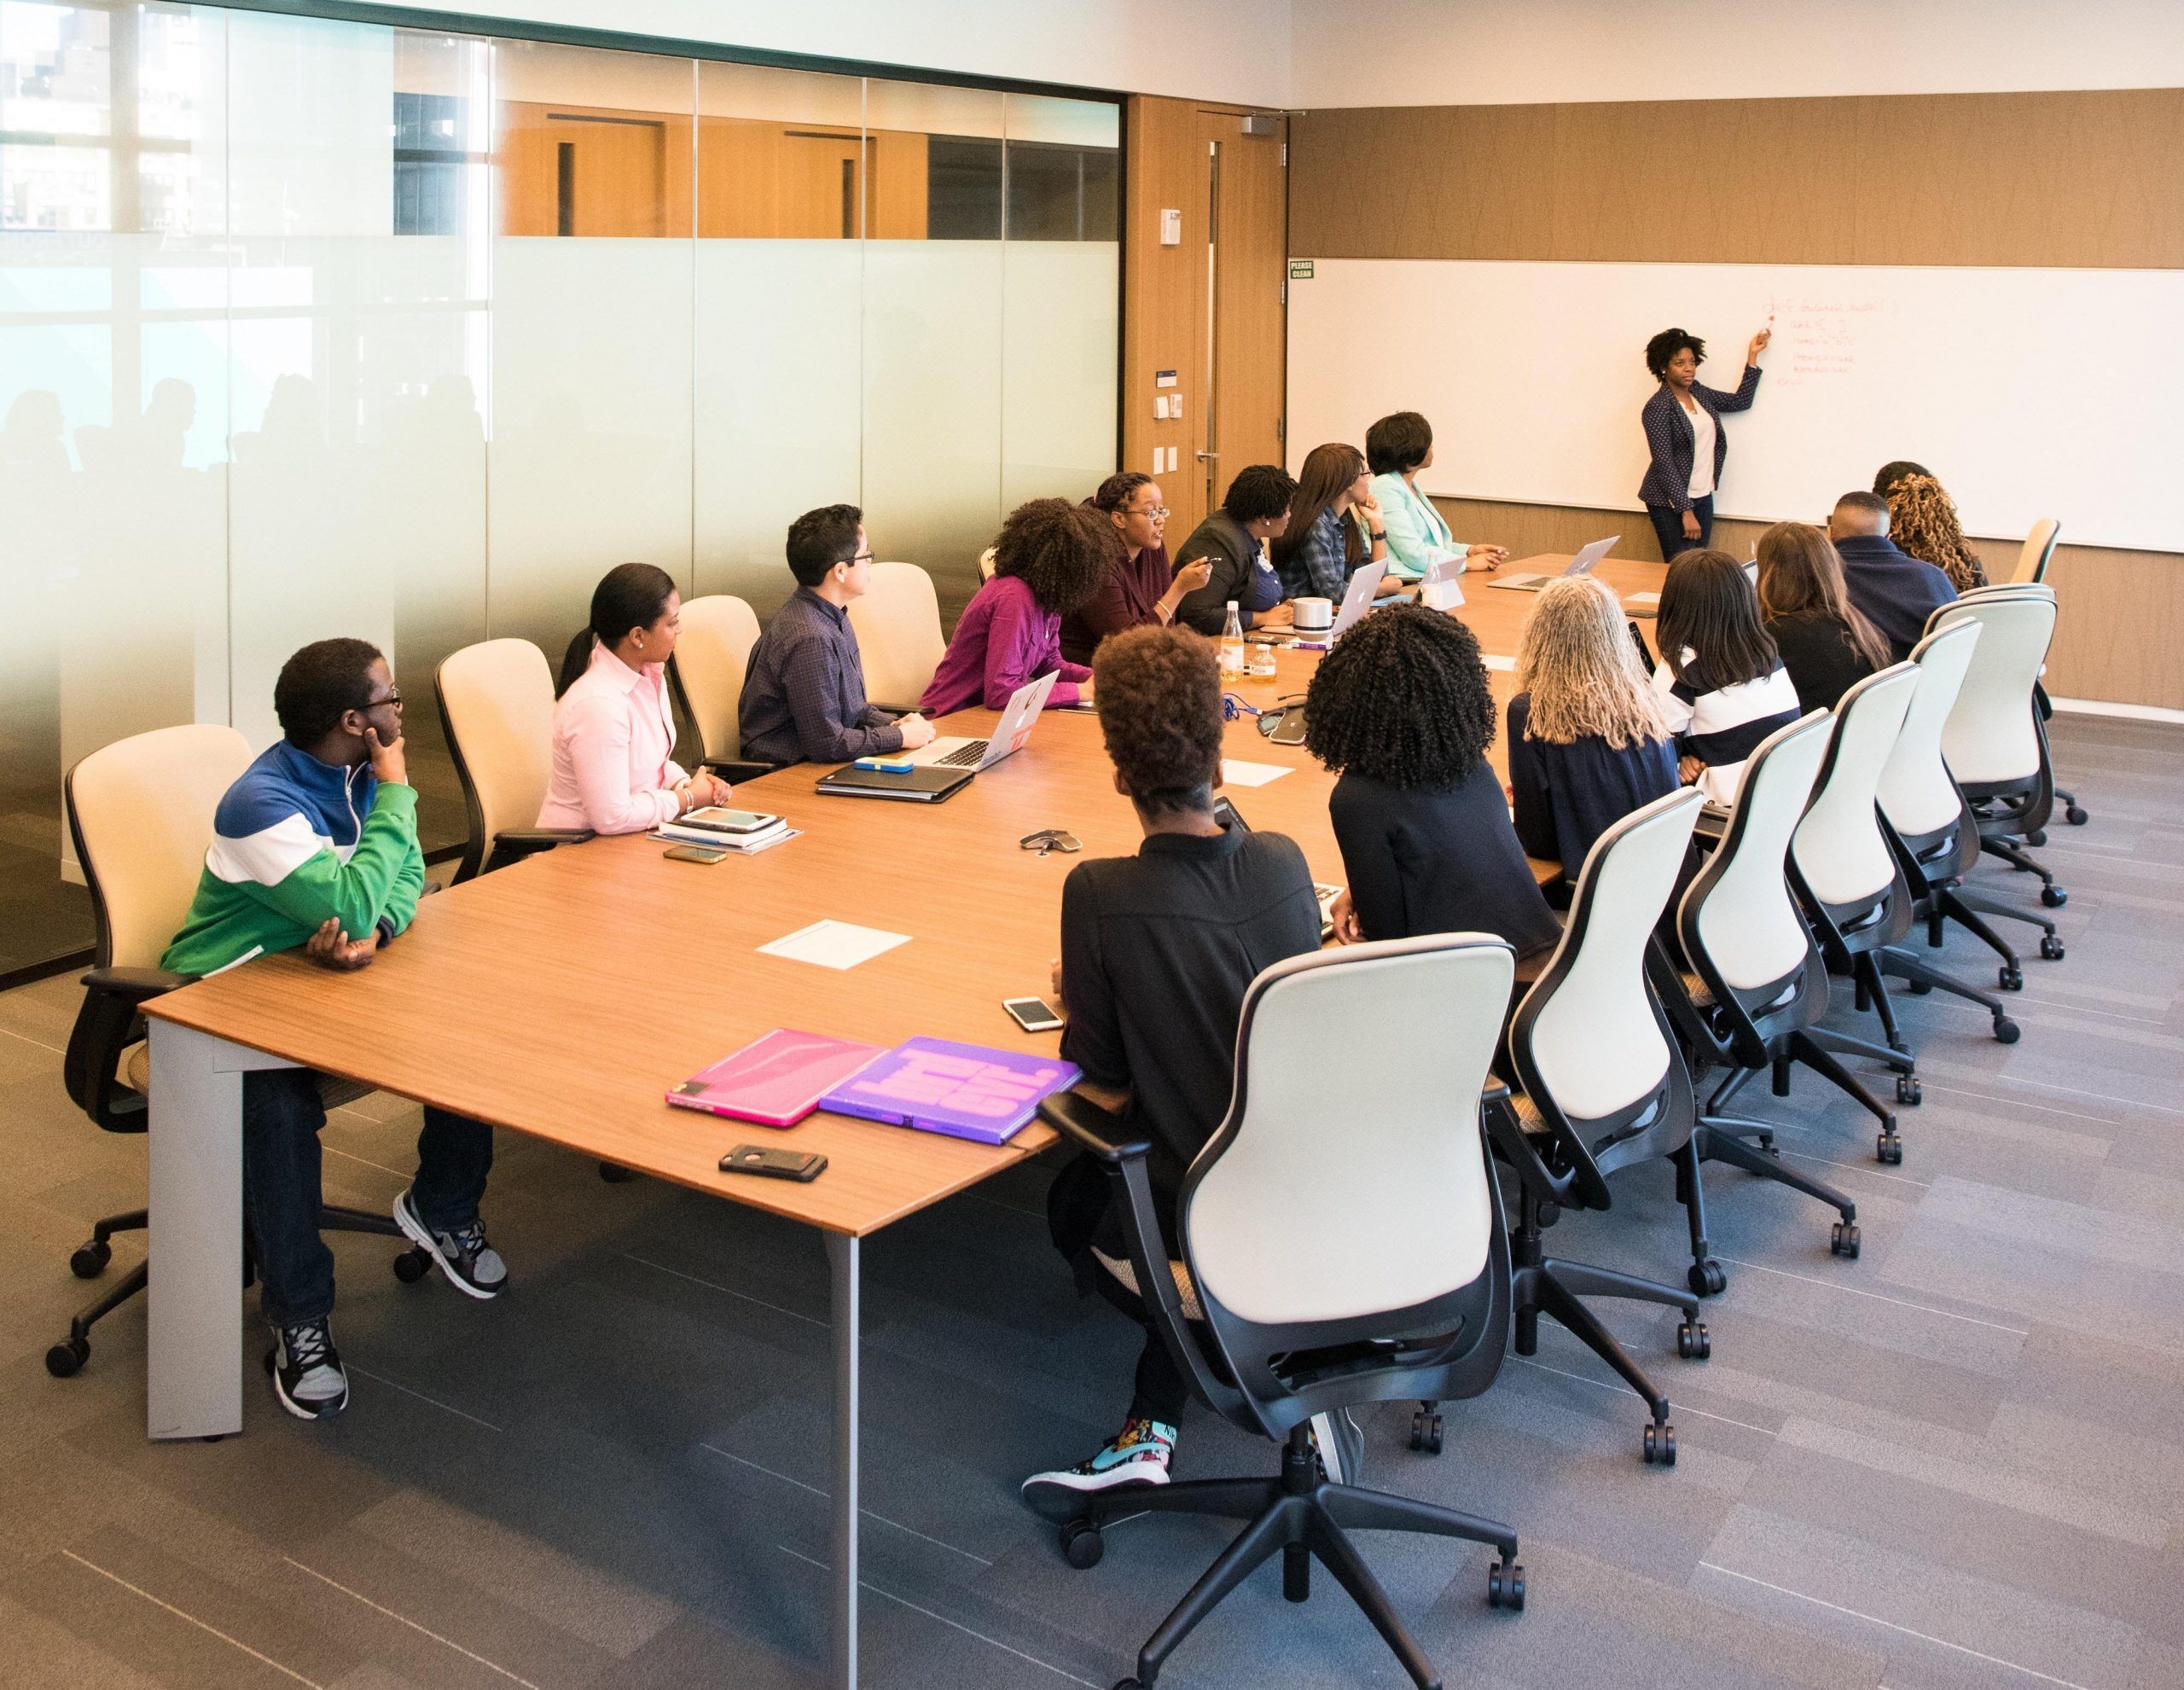 Lady presenting on a whiteboard to a group of young people